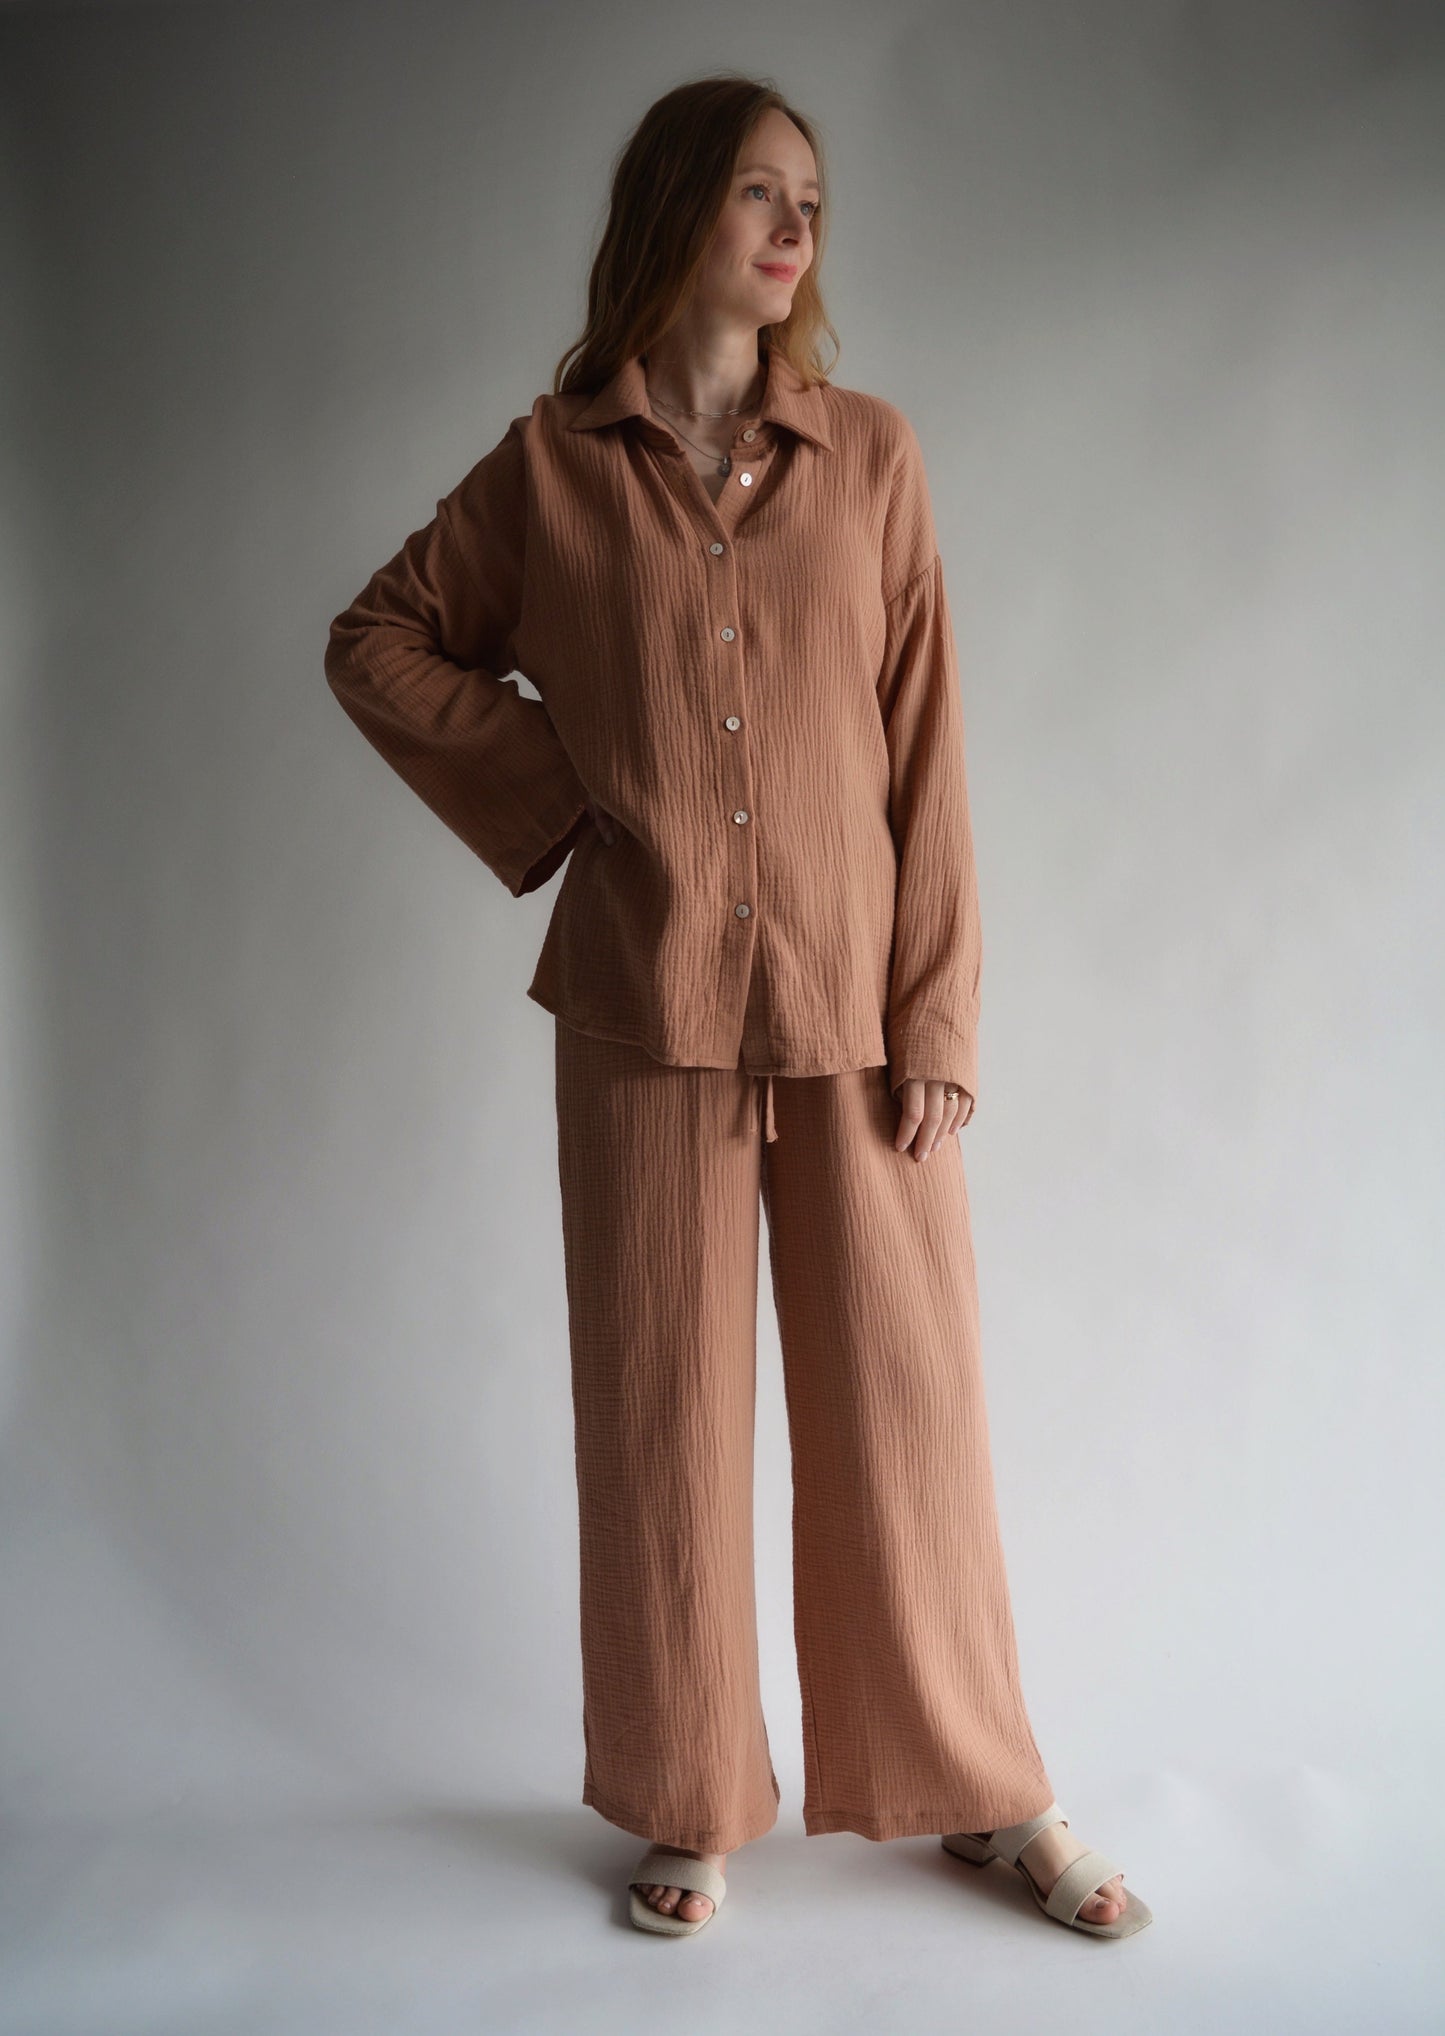 Cotton Muslin  Two-Piece Set: Shirt and Pants in Blush Brown color